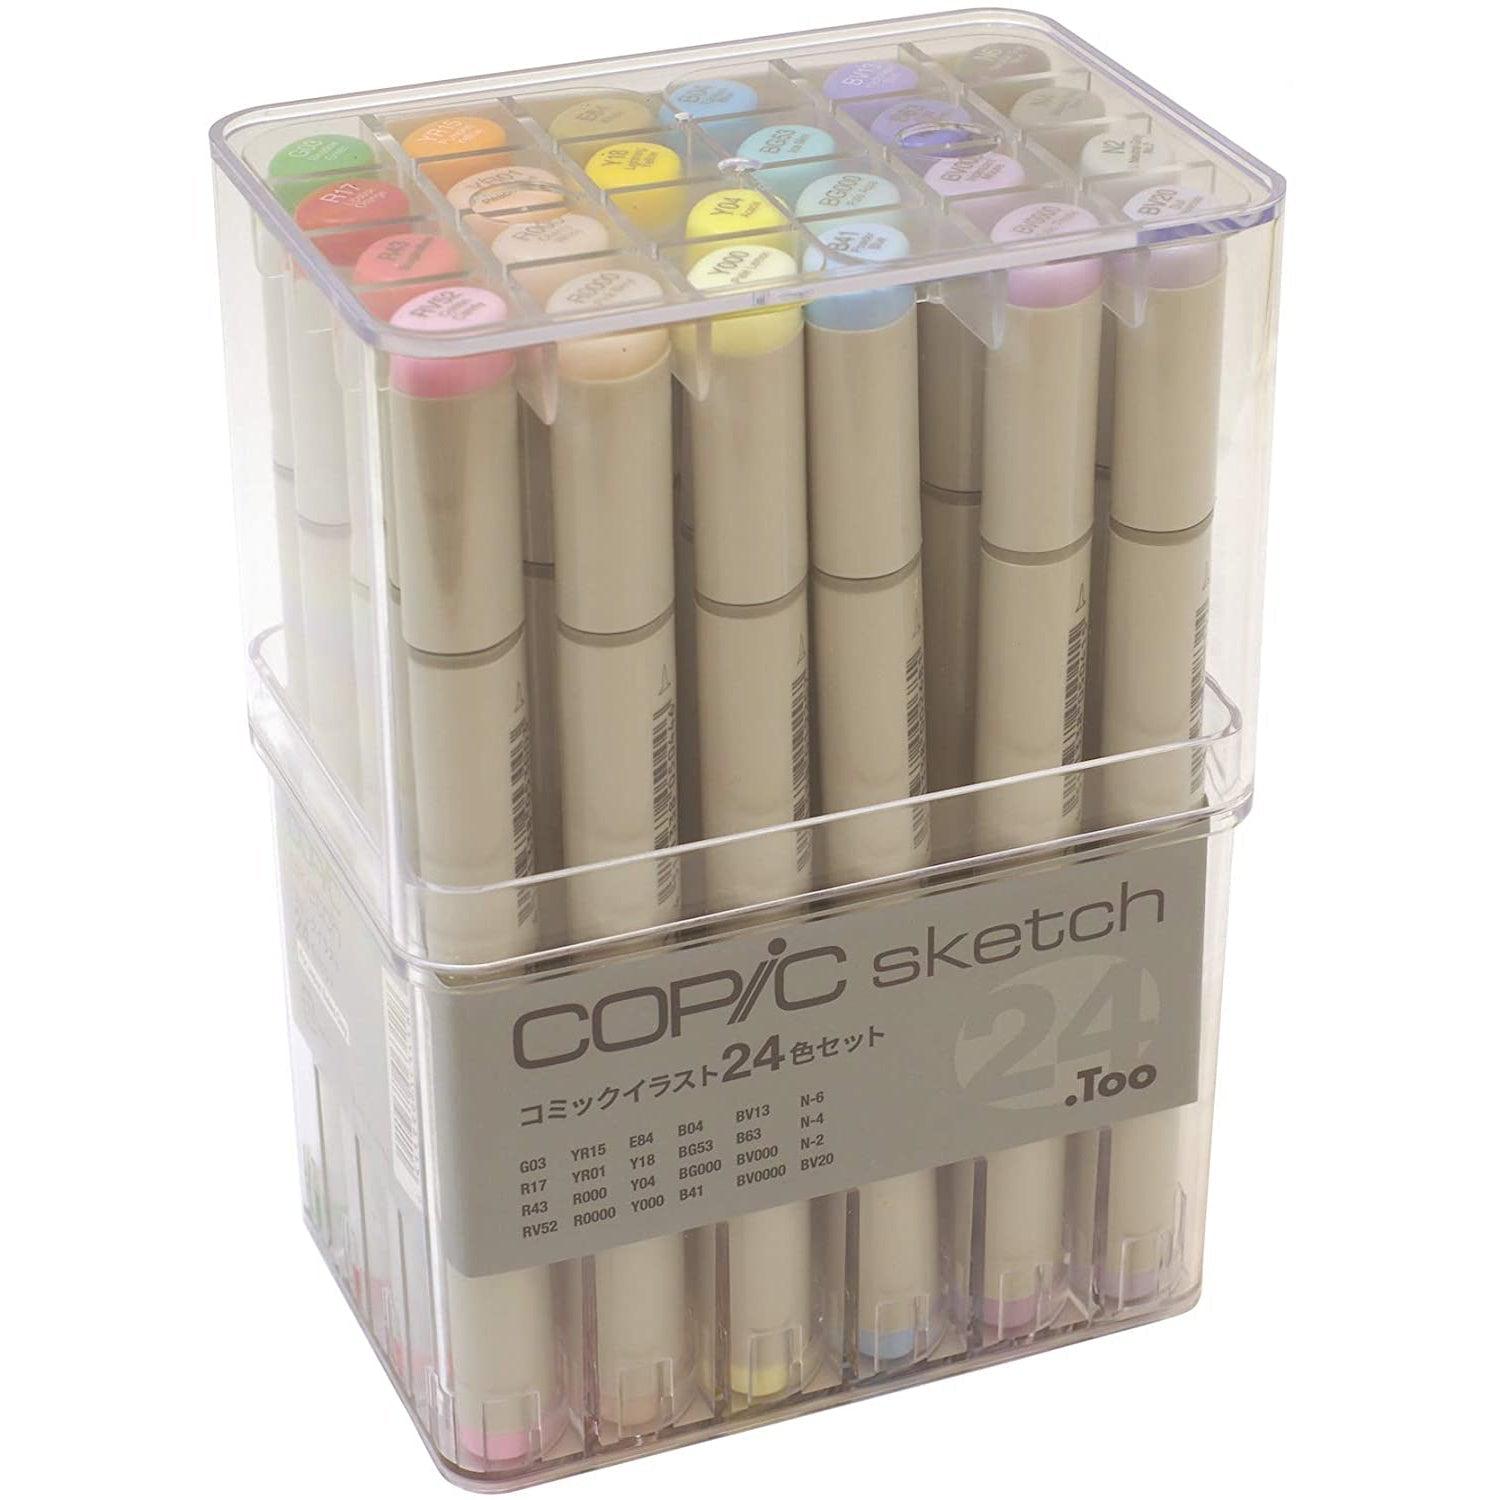 Copic Sketch Marker Set of 6 - Perfect Primaries - Copic-shop.co.uk